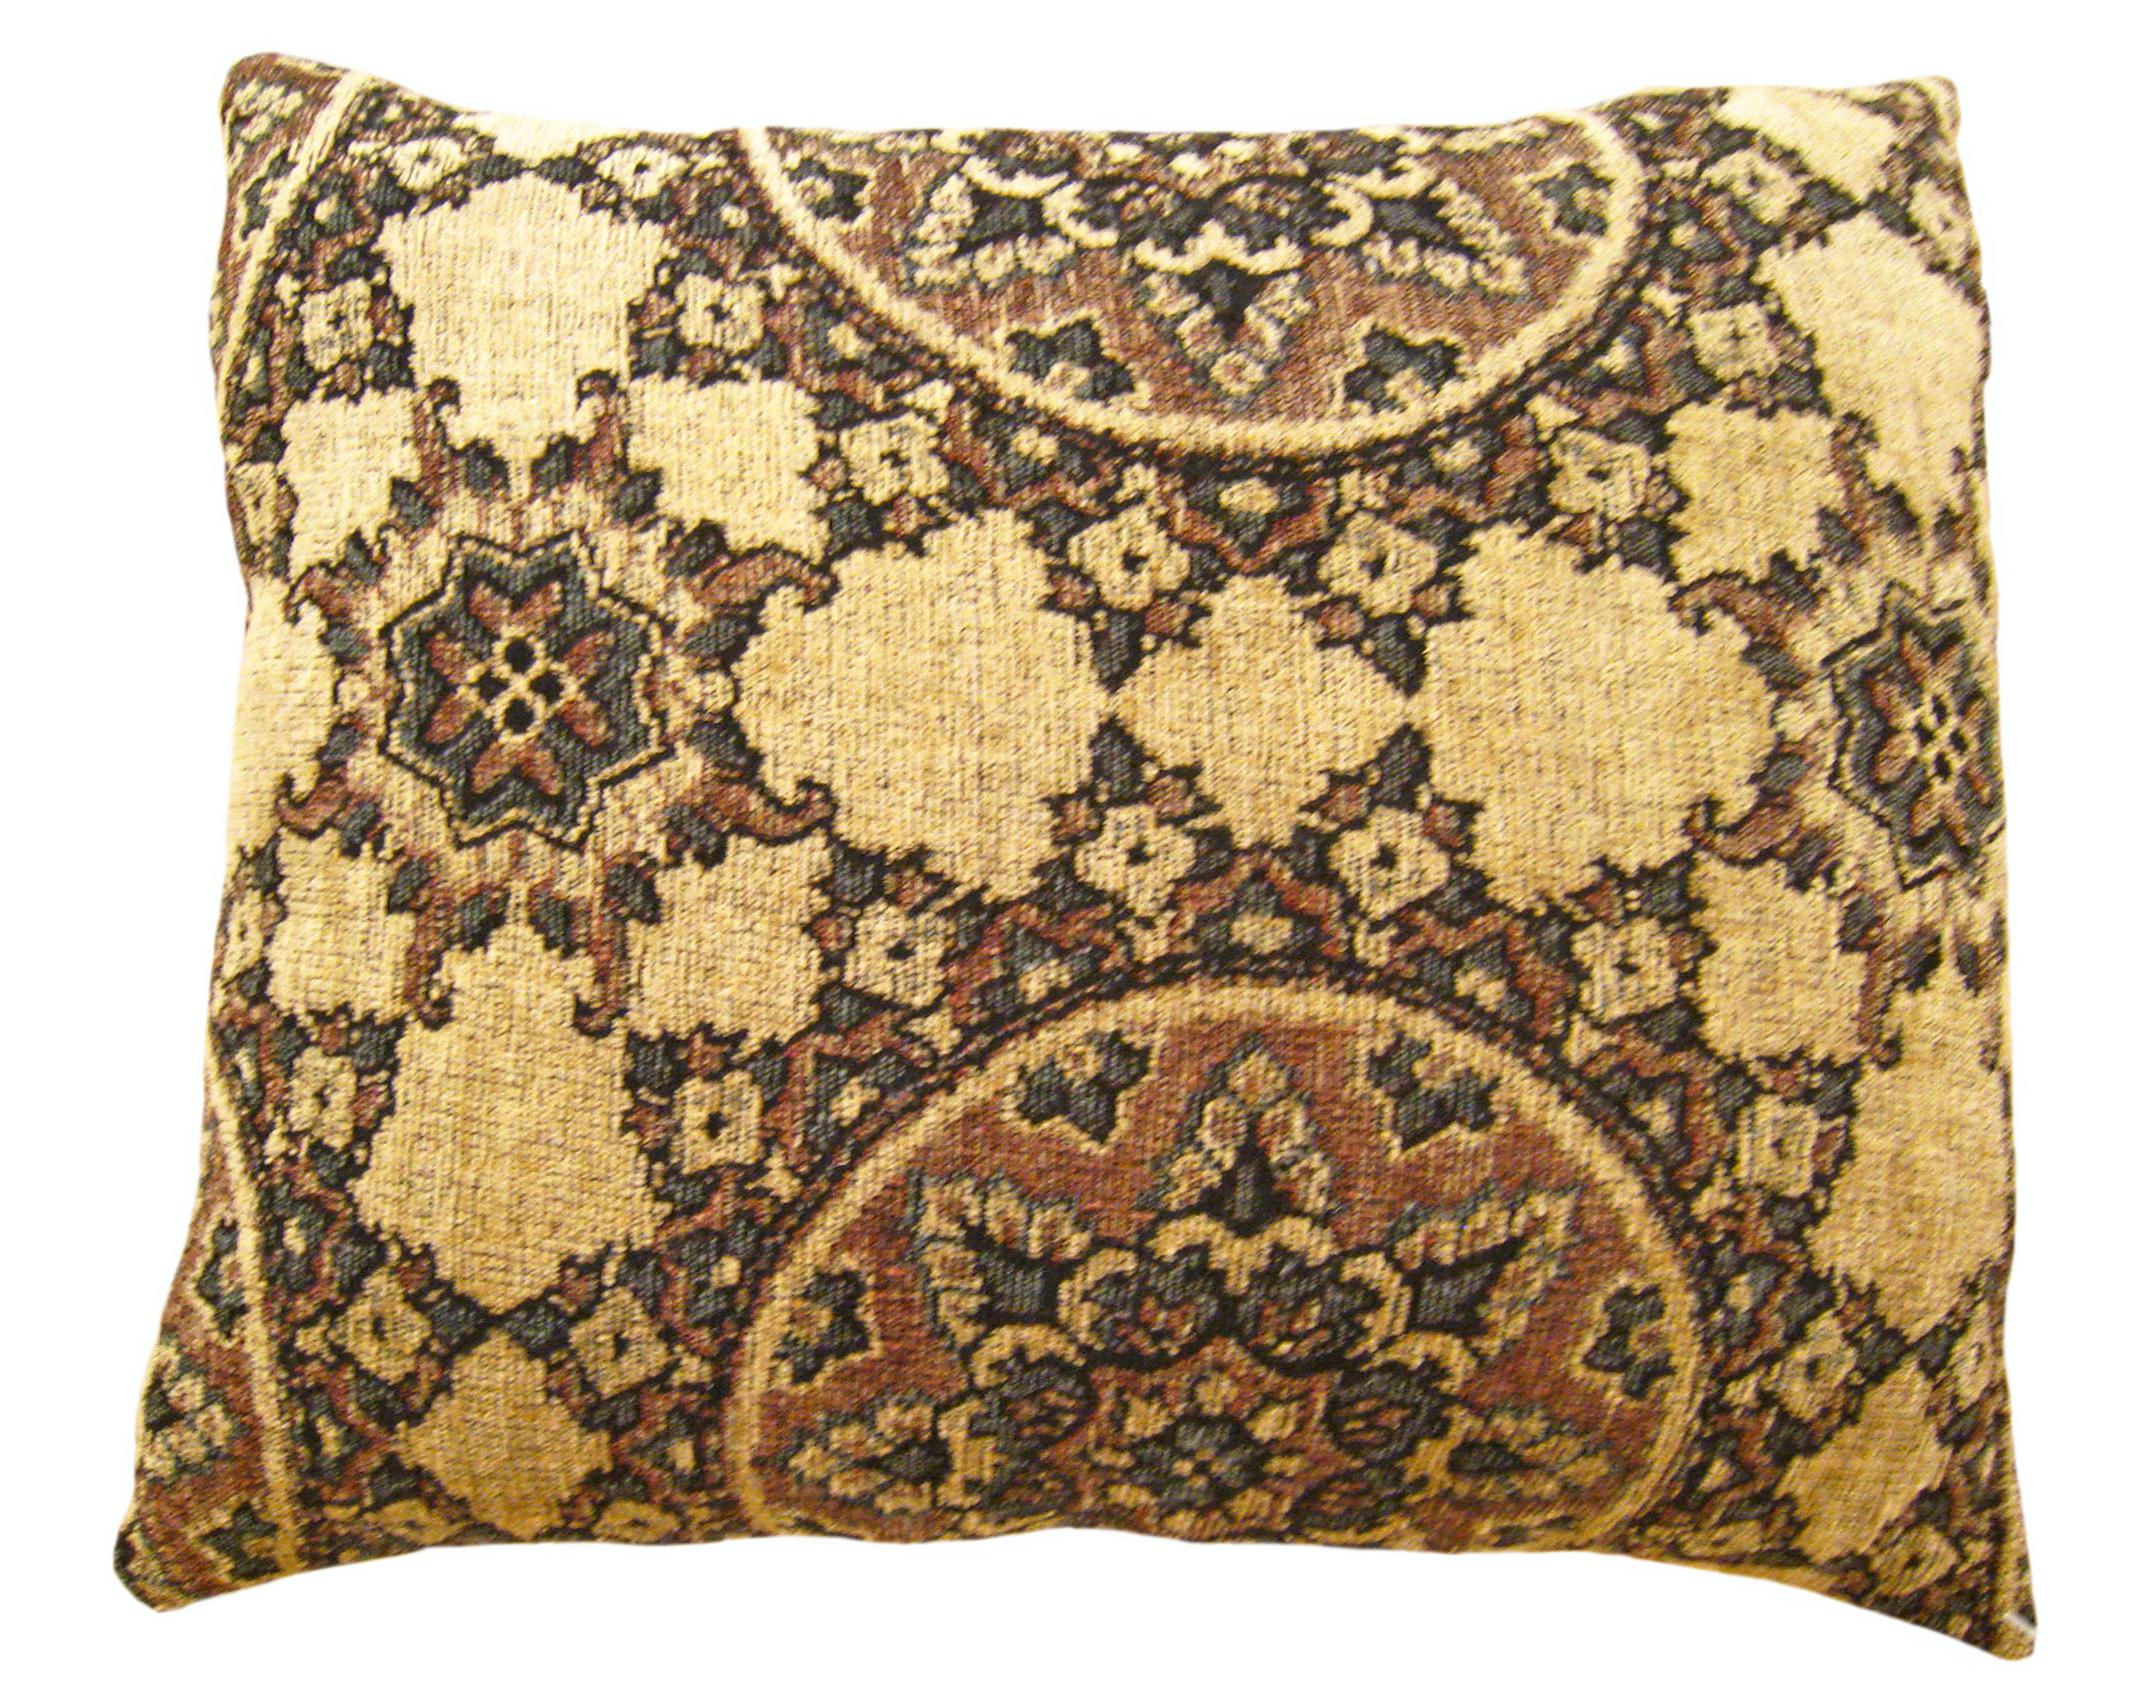 Vintage American Taperstry Circle Rug Pillow ; size 20” x 18”.

A vintage decorative pillow with circles design motif in a brown central field, size 20” x 18”. This lovely decorative pillow features an antique rug on front which is characterized by